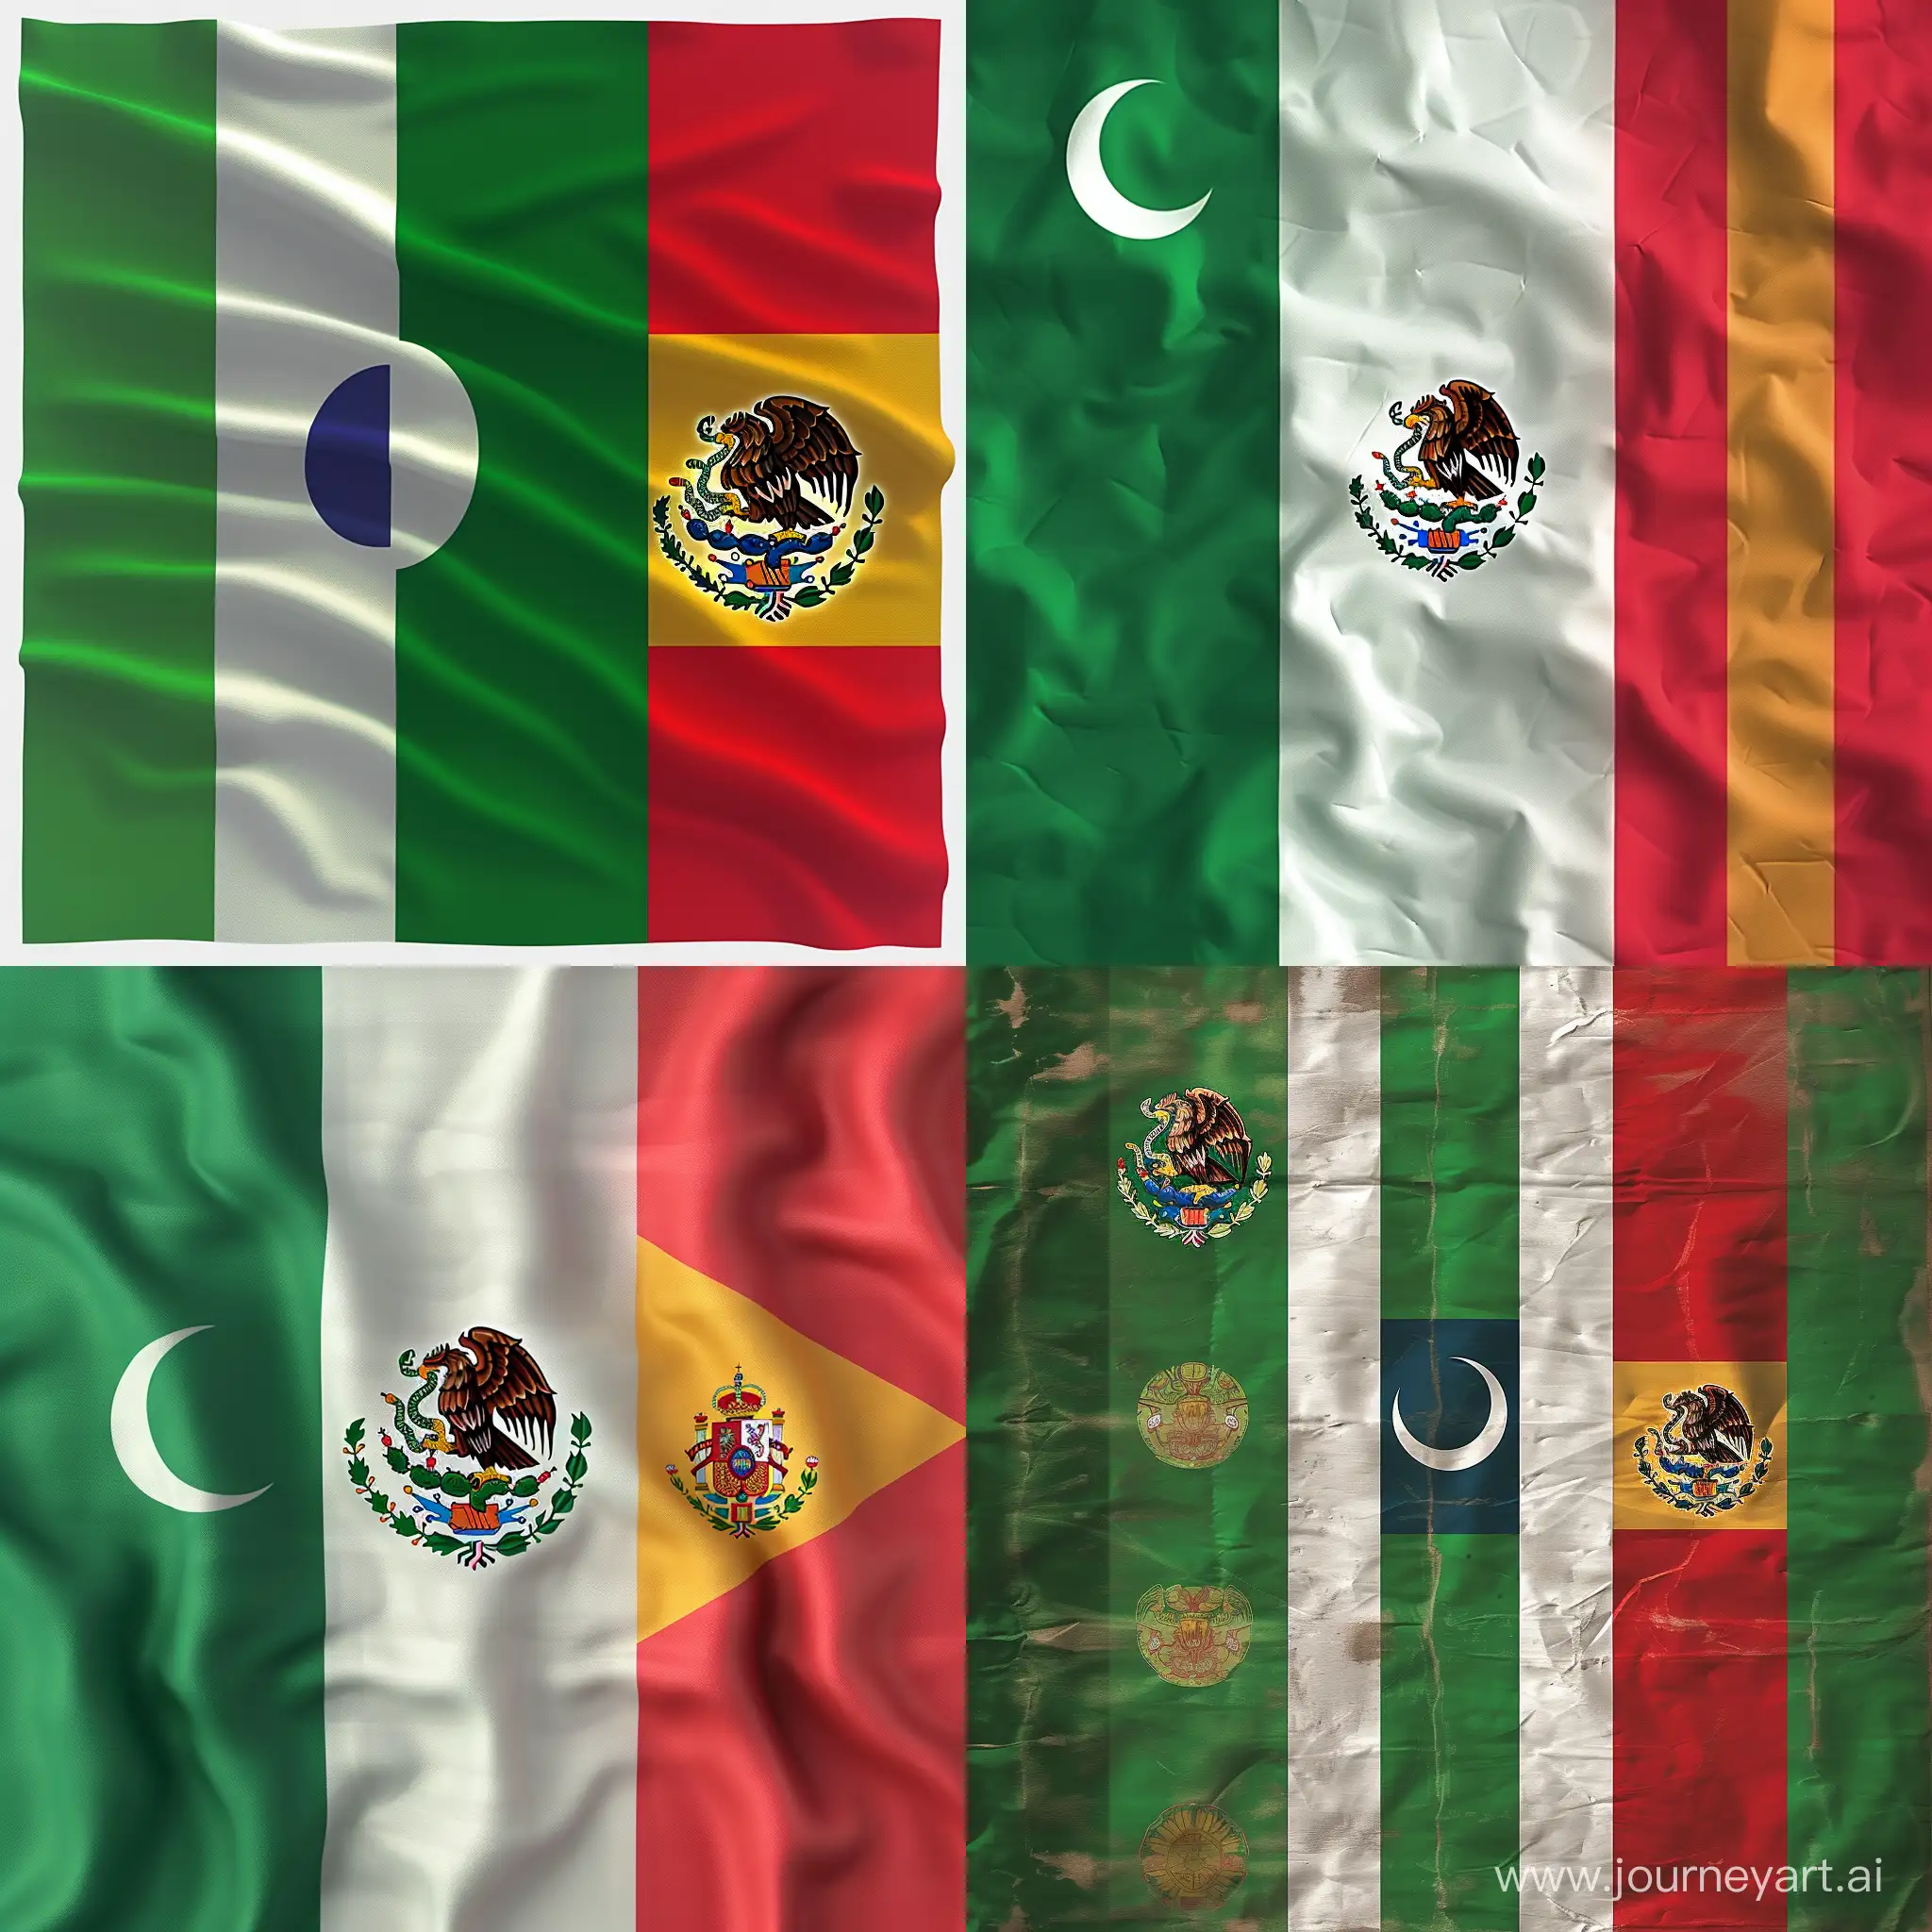 National-Flags-of-Pakistan-Mexico-Greece-Portugal-Cyprus-and-Spain